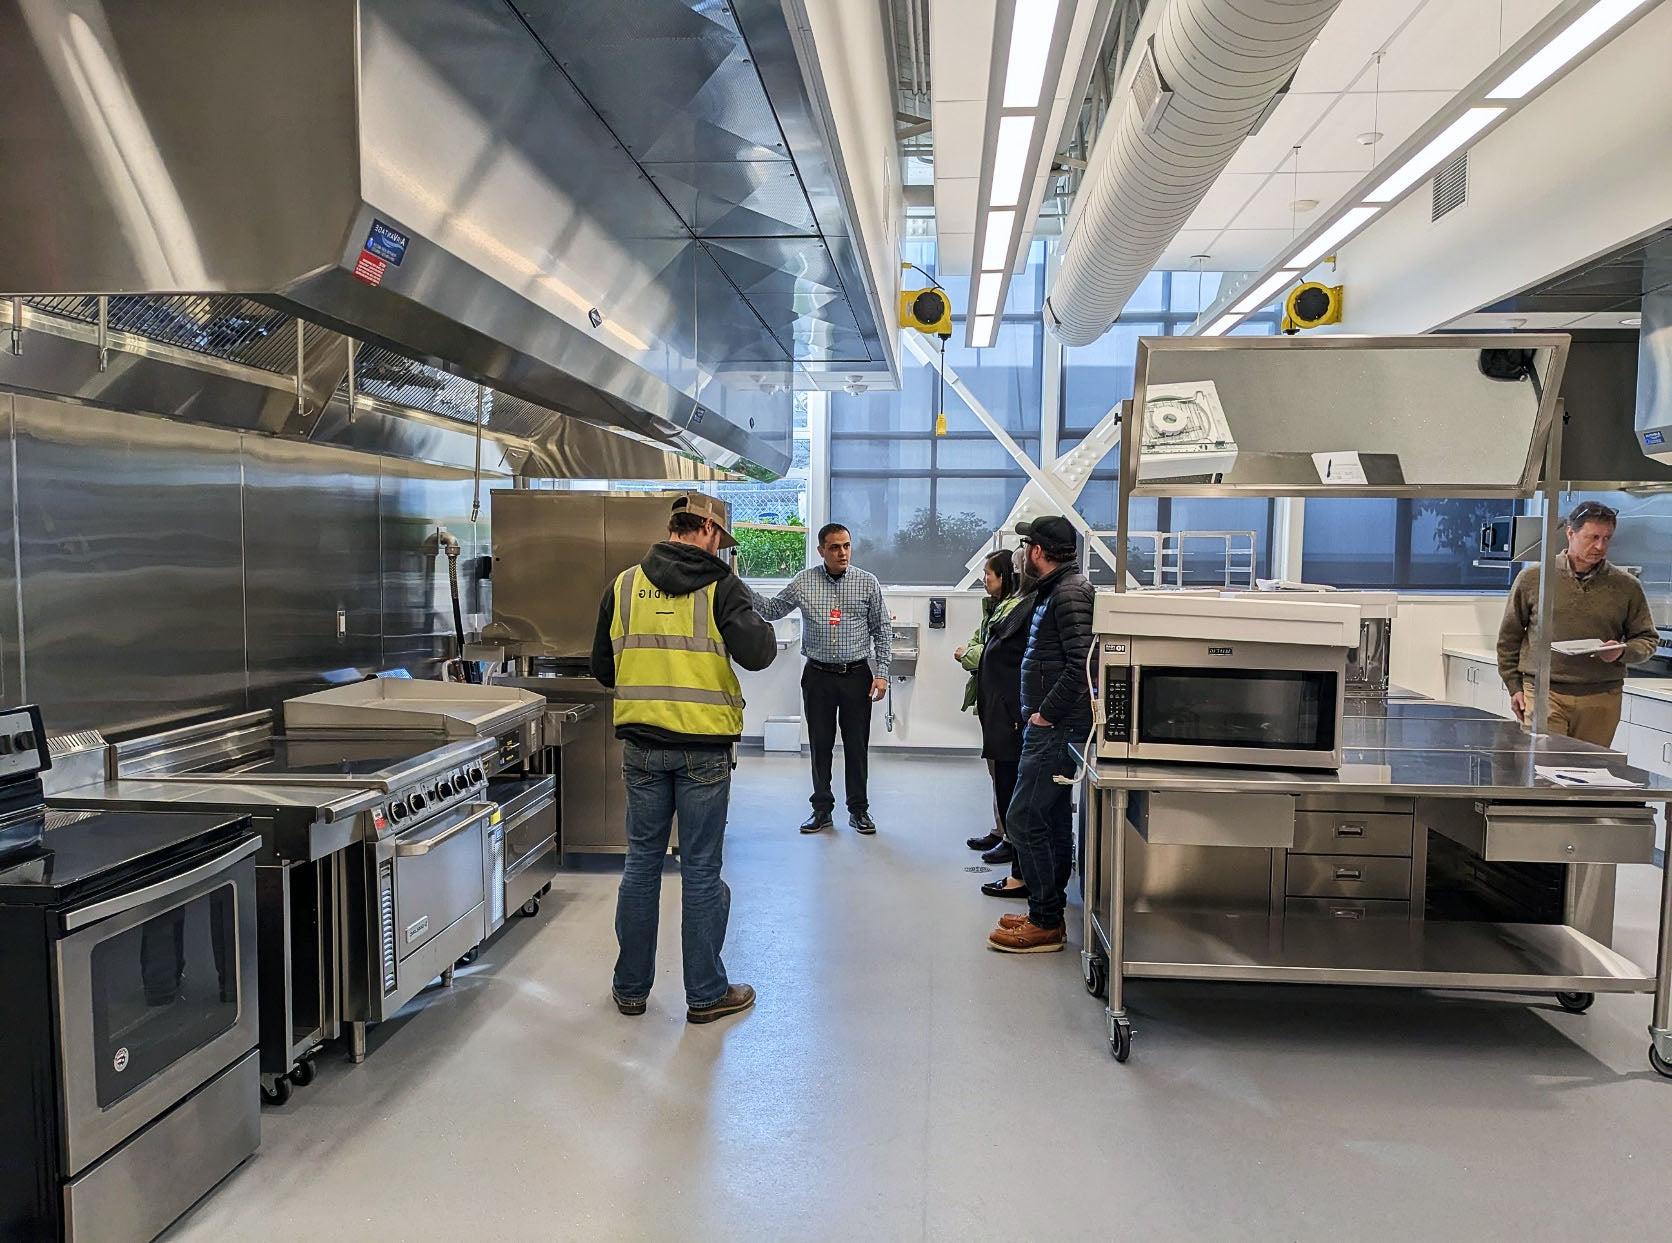 a group of people look at commercial size stainless steel cooking equpiment